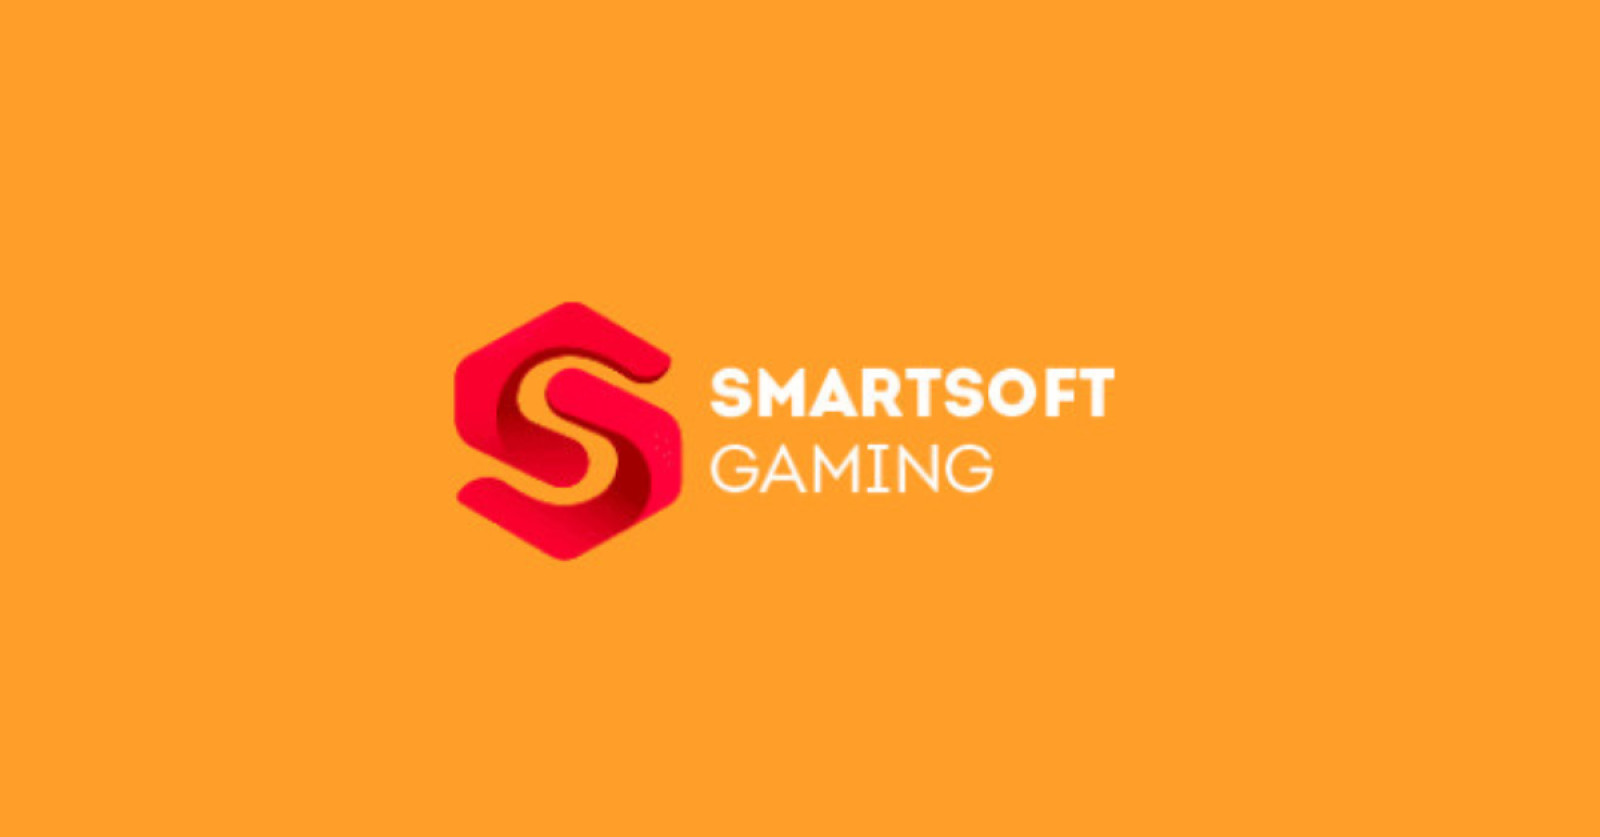 Entering In A New Era for Casino Games: Gamingtec Partners with SmartSoft